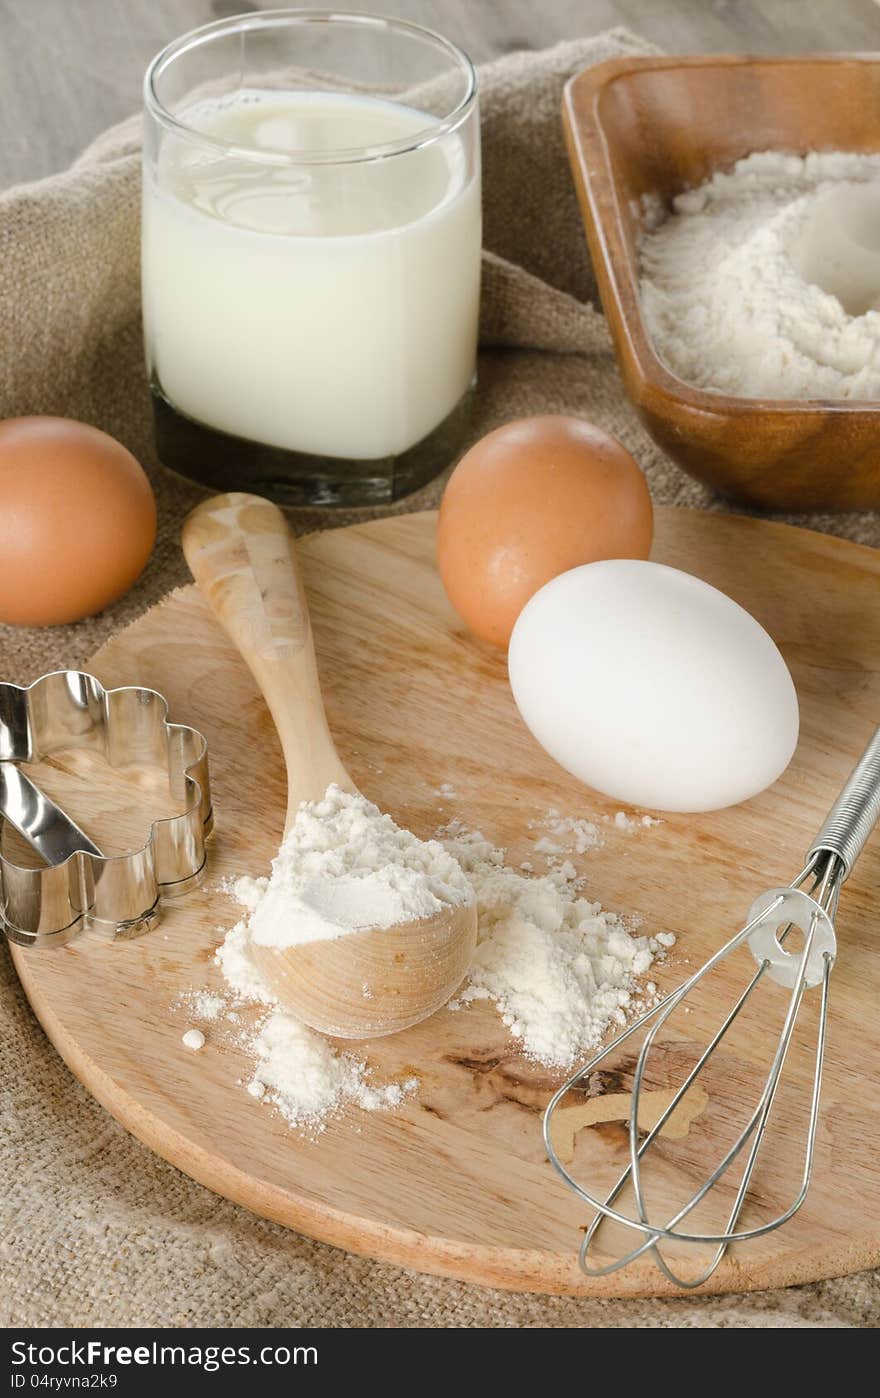 Ingredients for baking: flour, eggs, milk, cookie shape on a wooden board